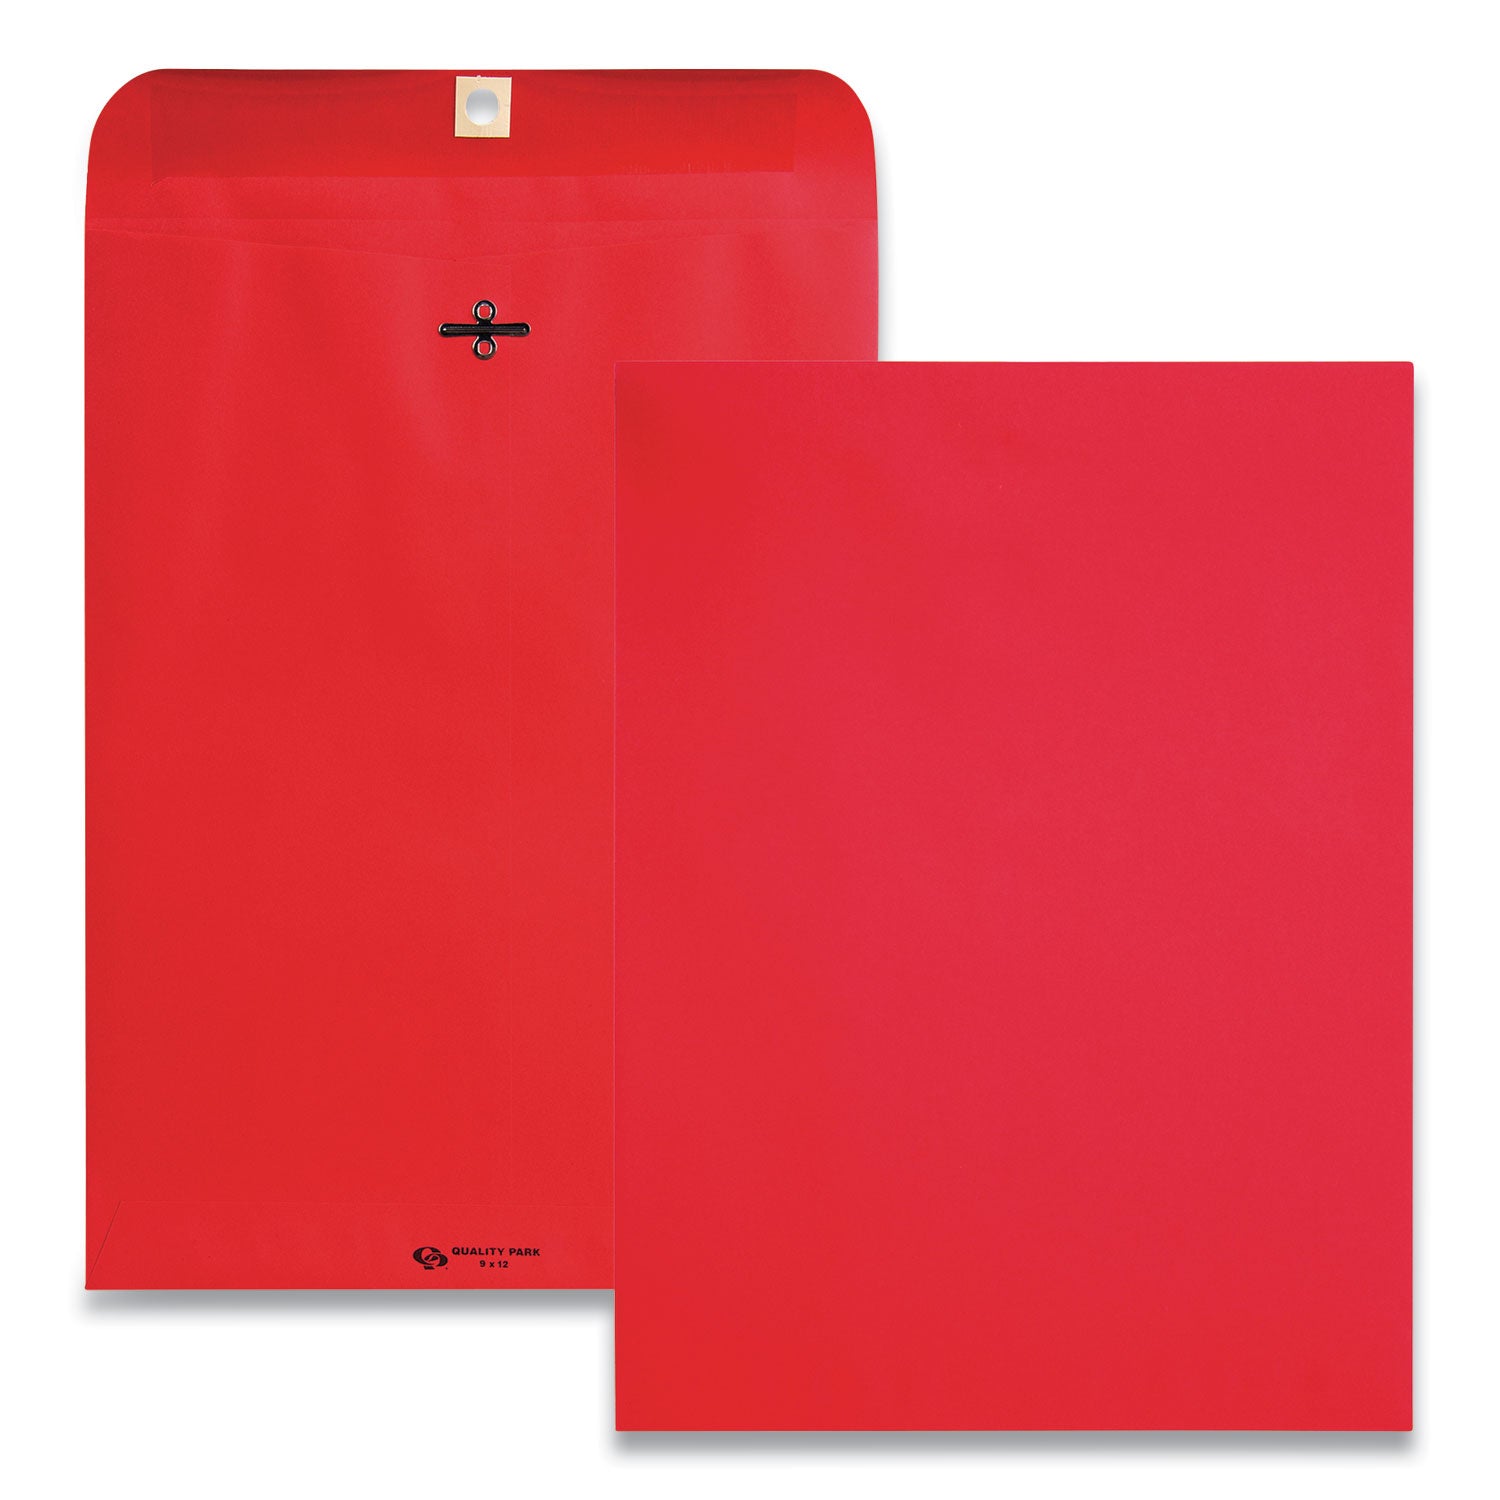 Clasp Envelope, 28 lb Bond Weight Paper, #90, Square Flap, Clasp/Gummed Closure, 9 x 12, Red, 10/Pack - 